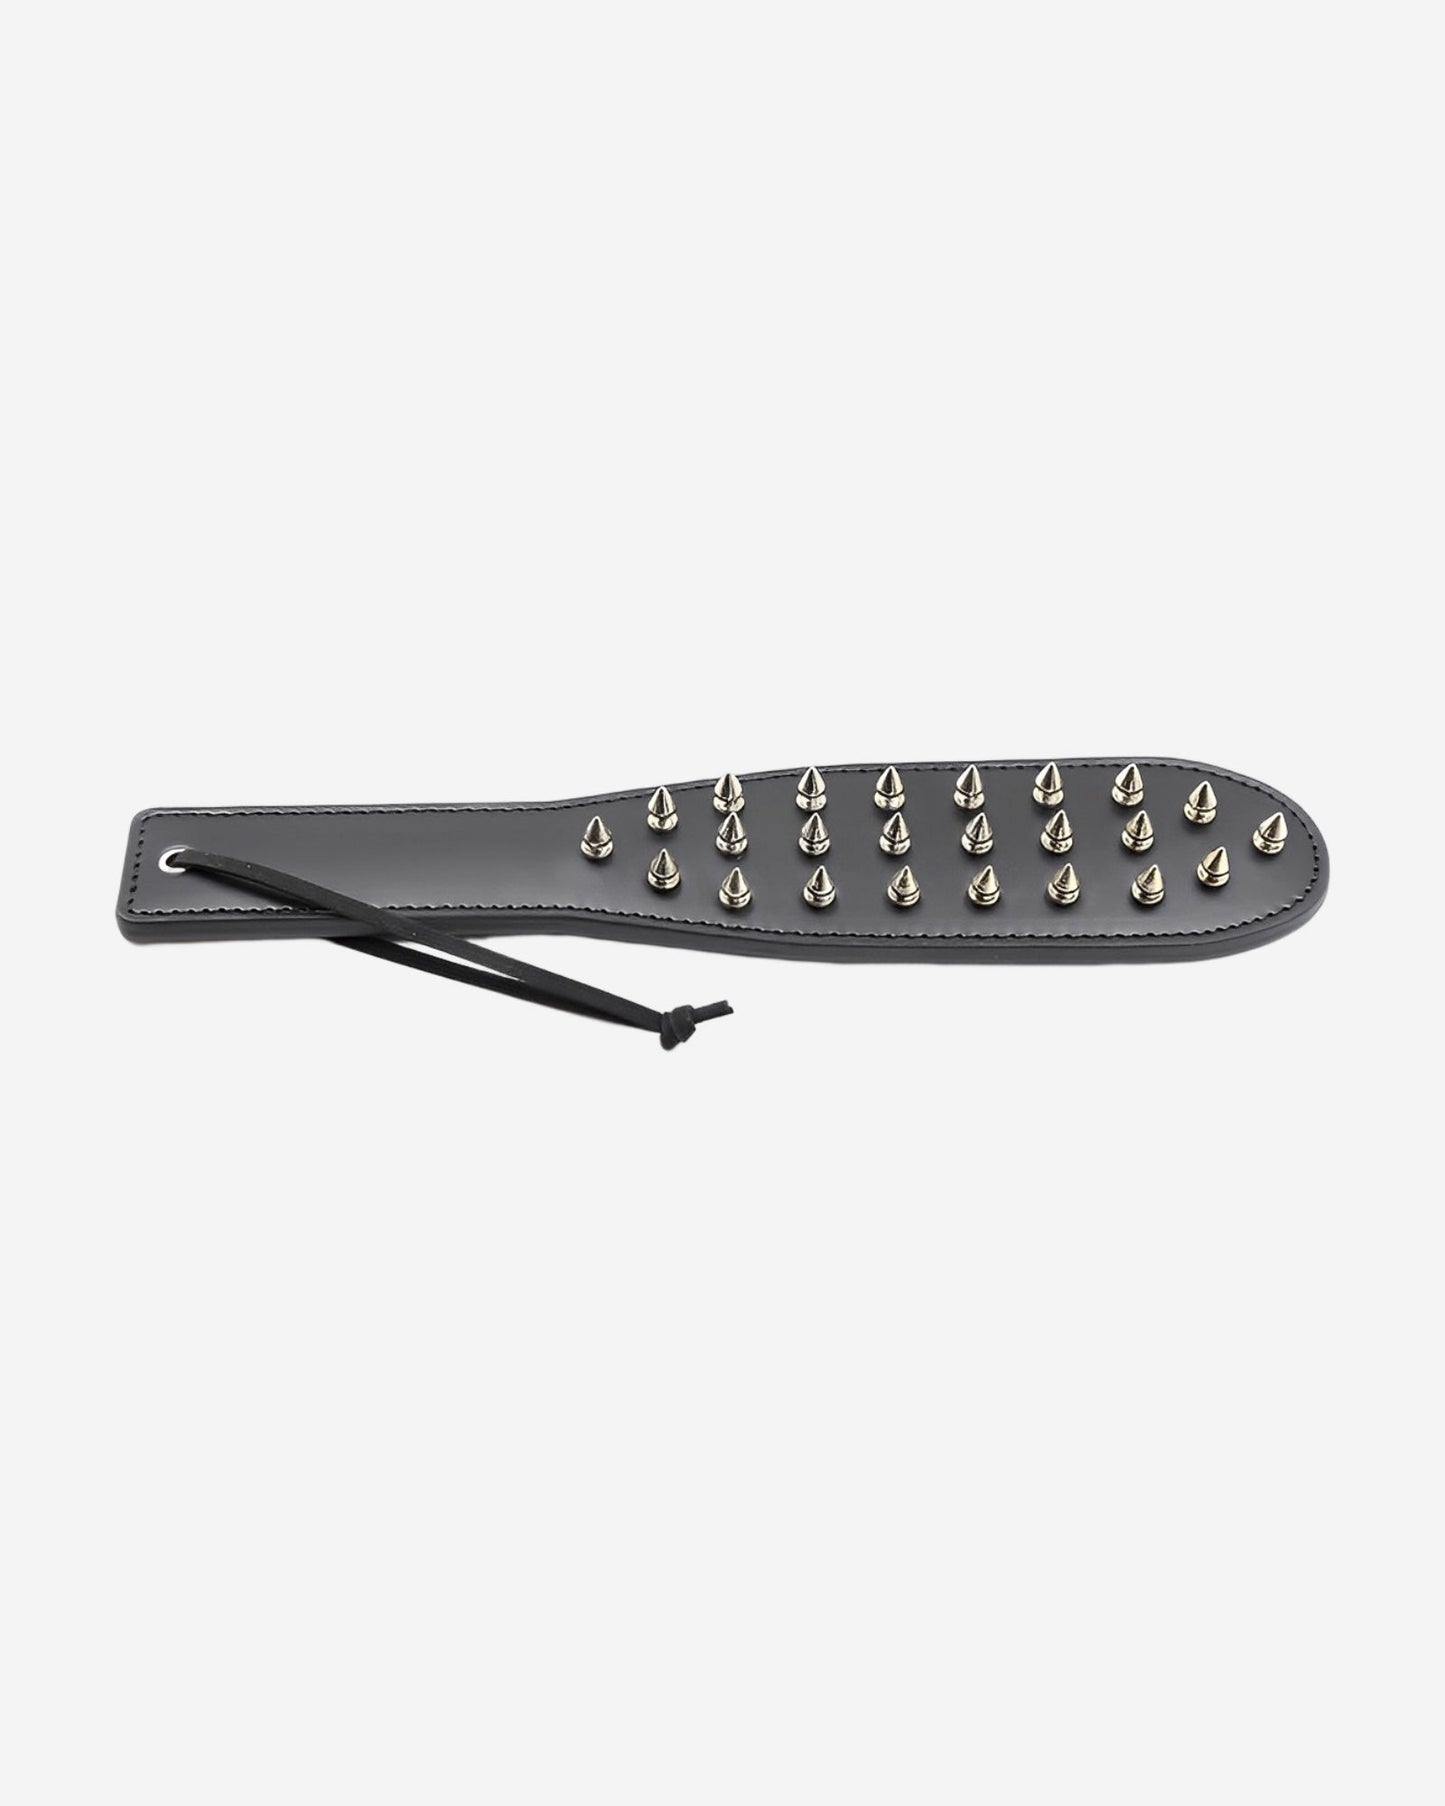 0 Dual-sided Paddle with Spikes Slap butt